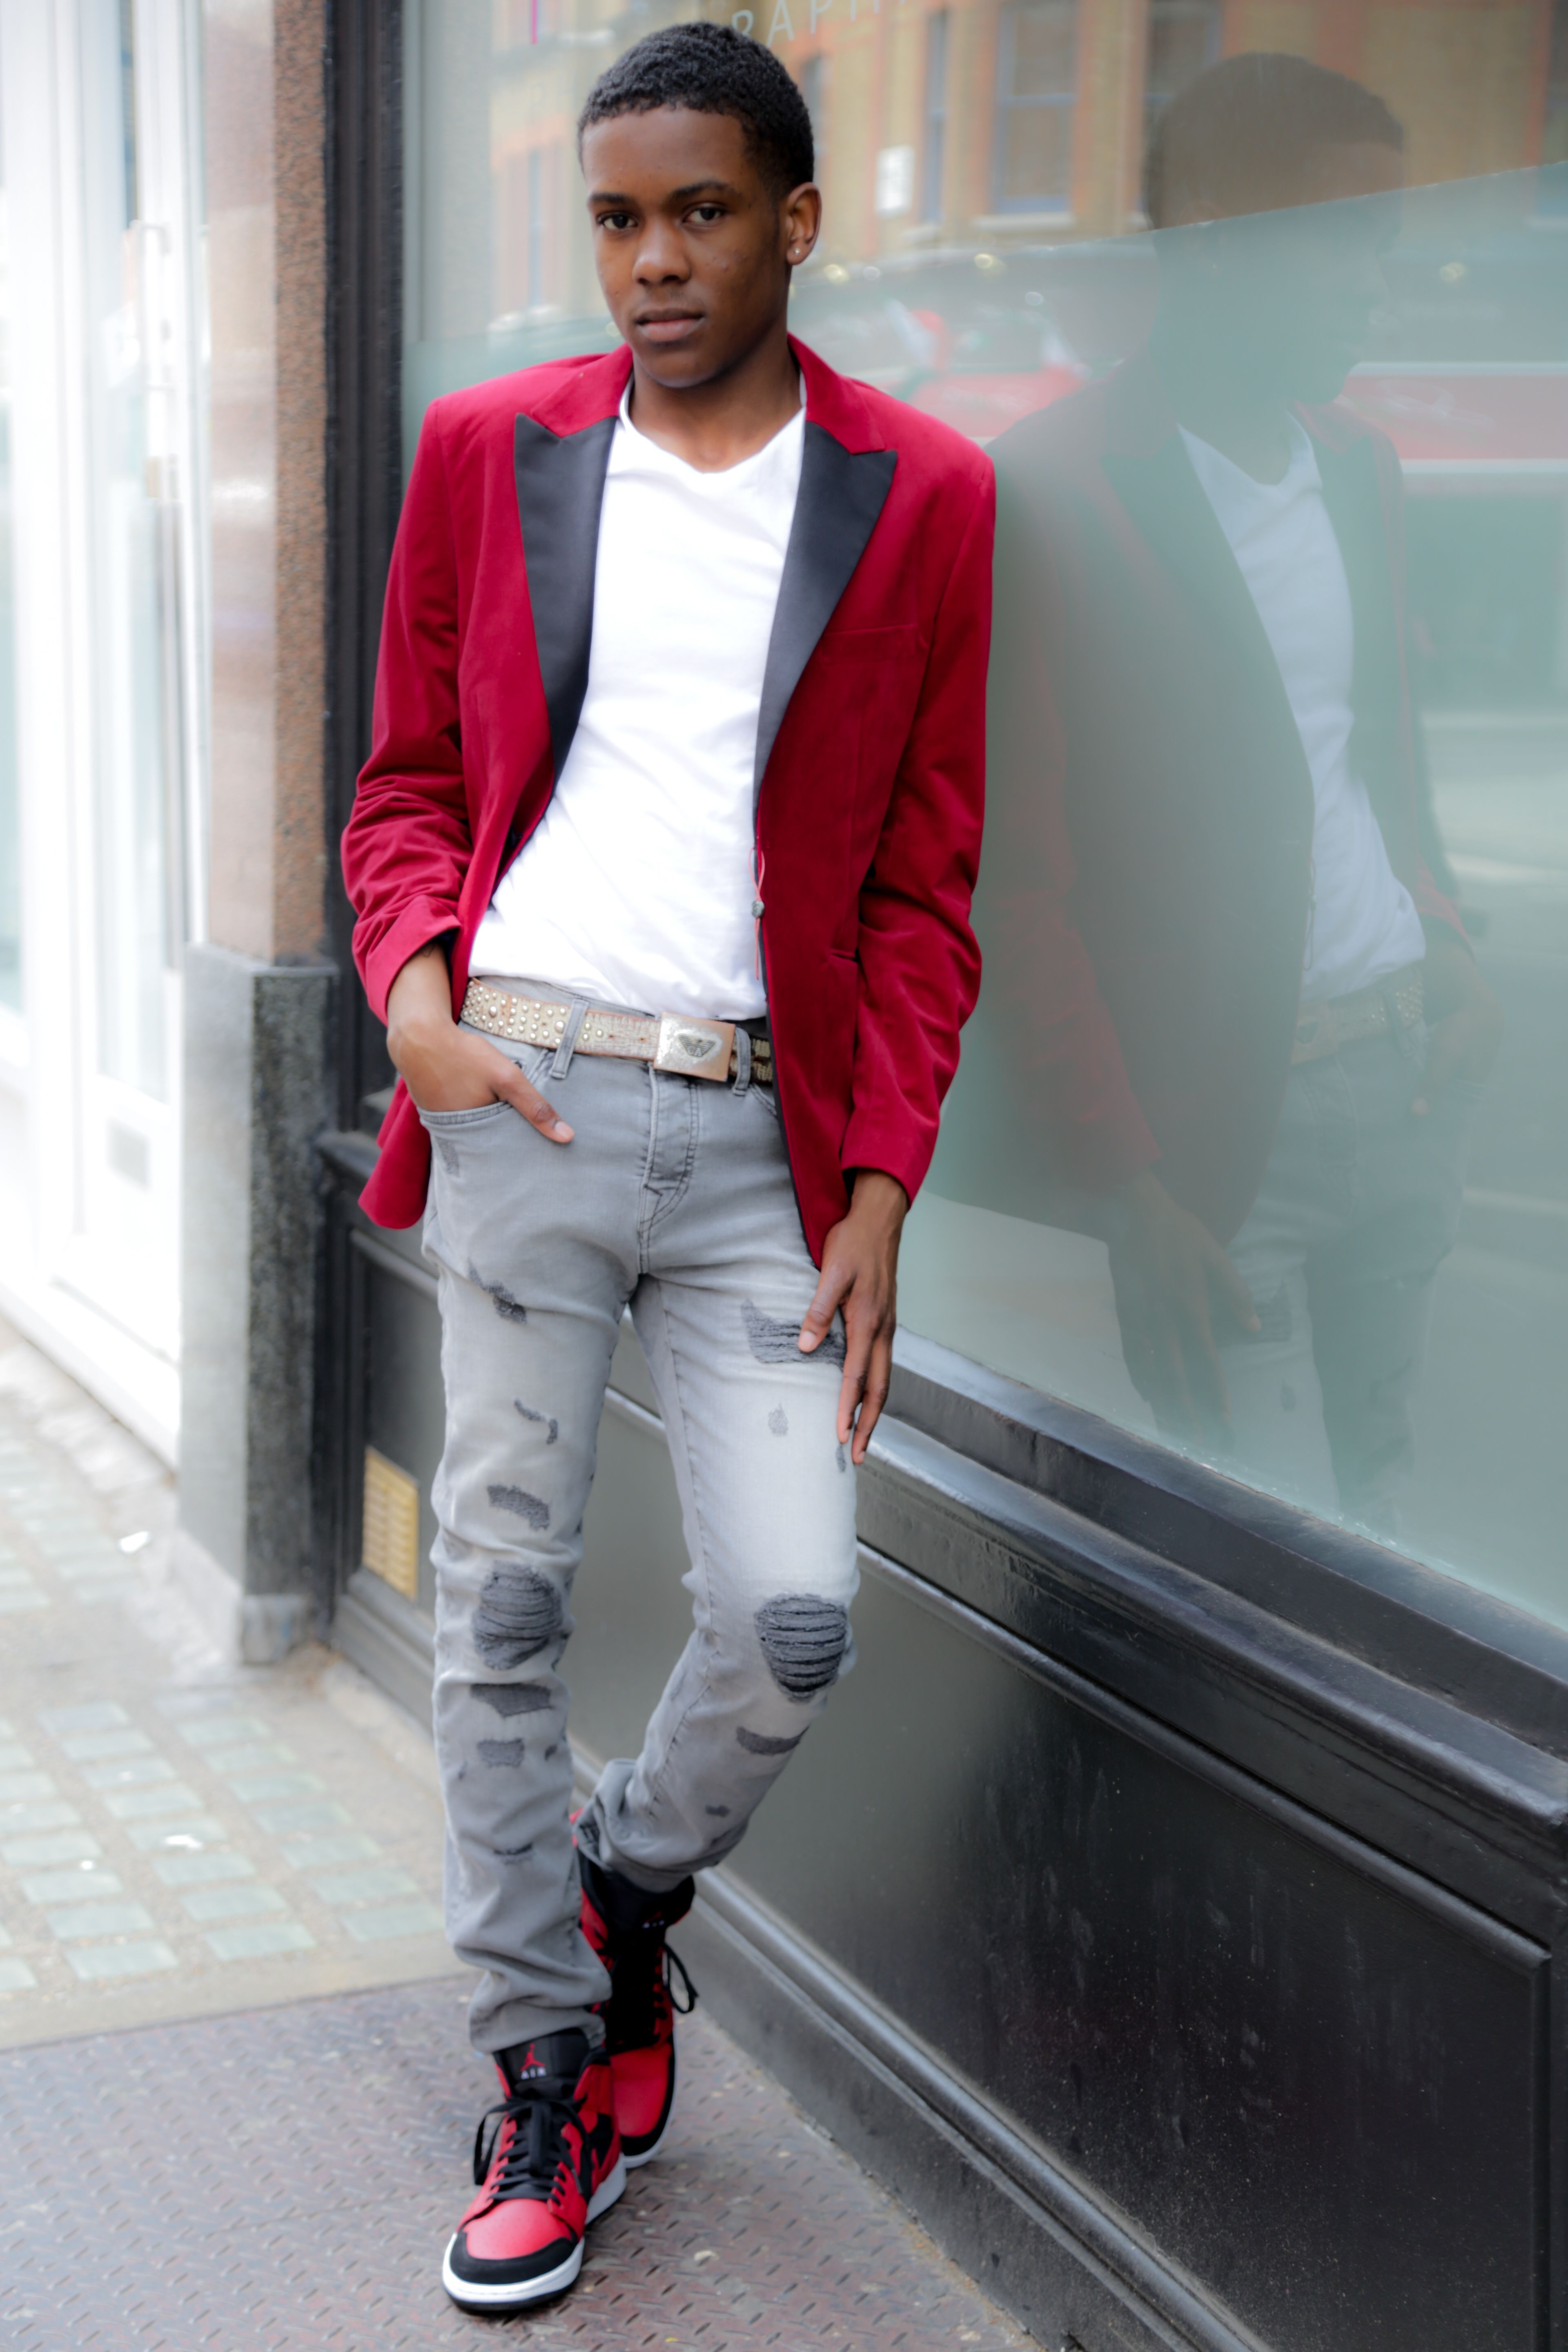 Jahray Facey Profile | YUMM - Your Model Management